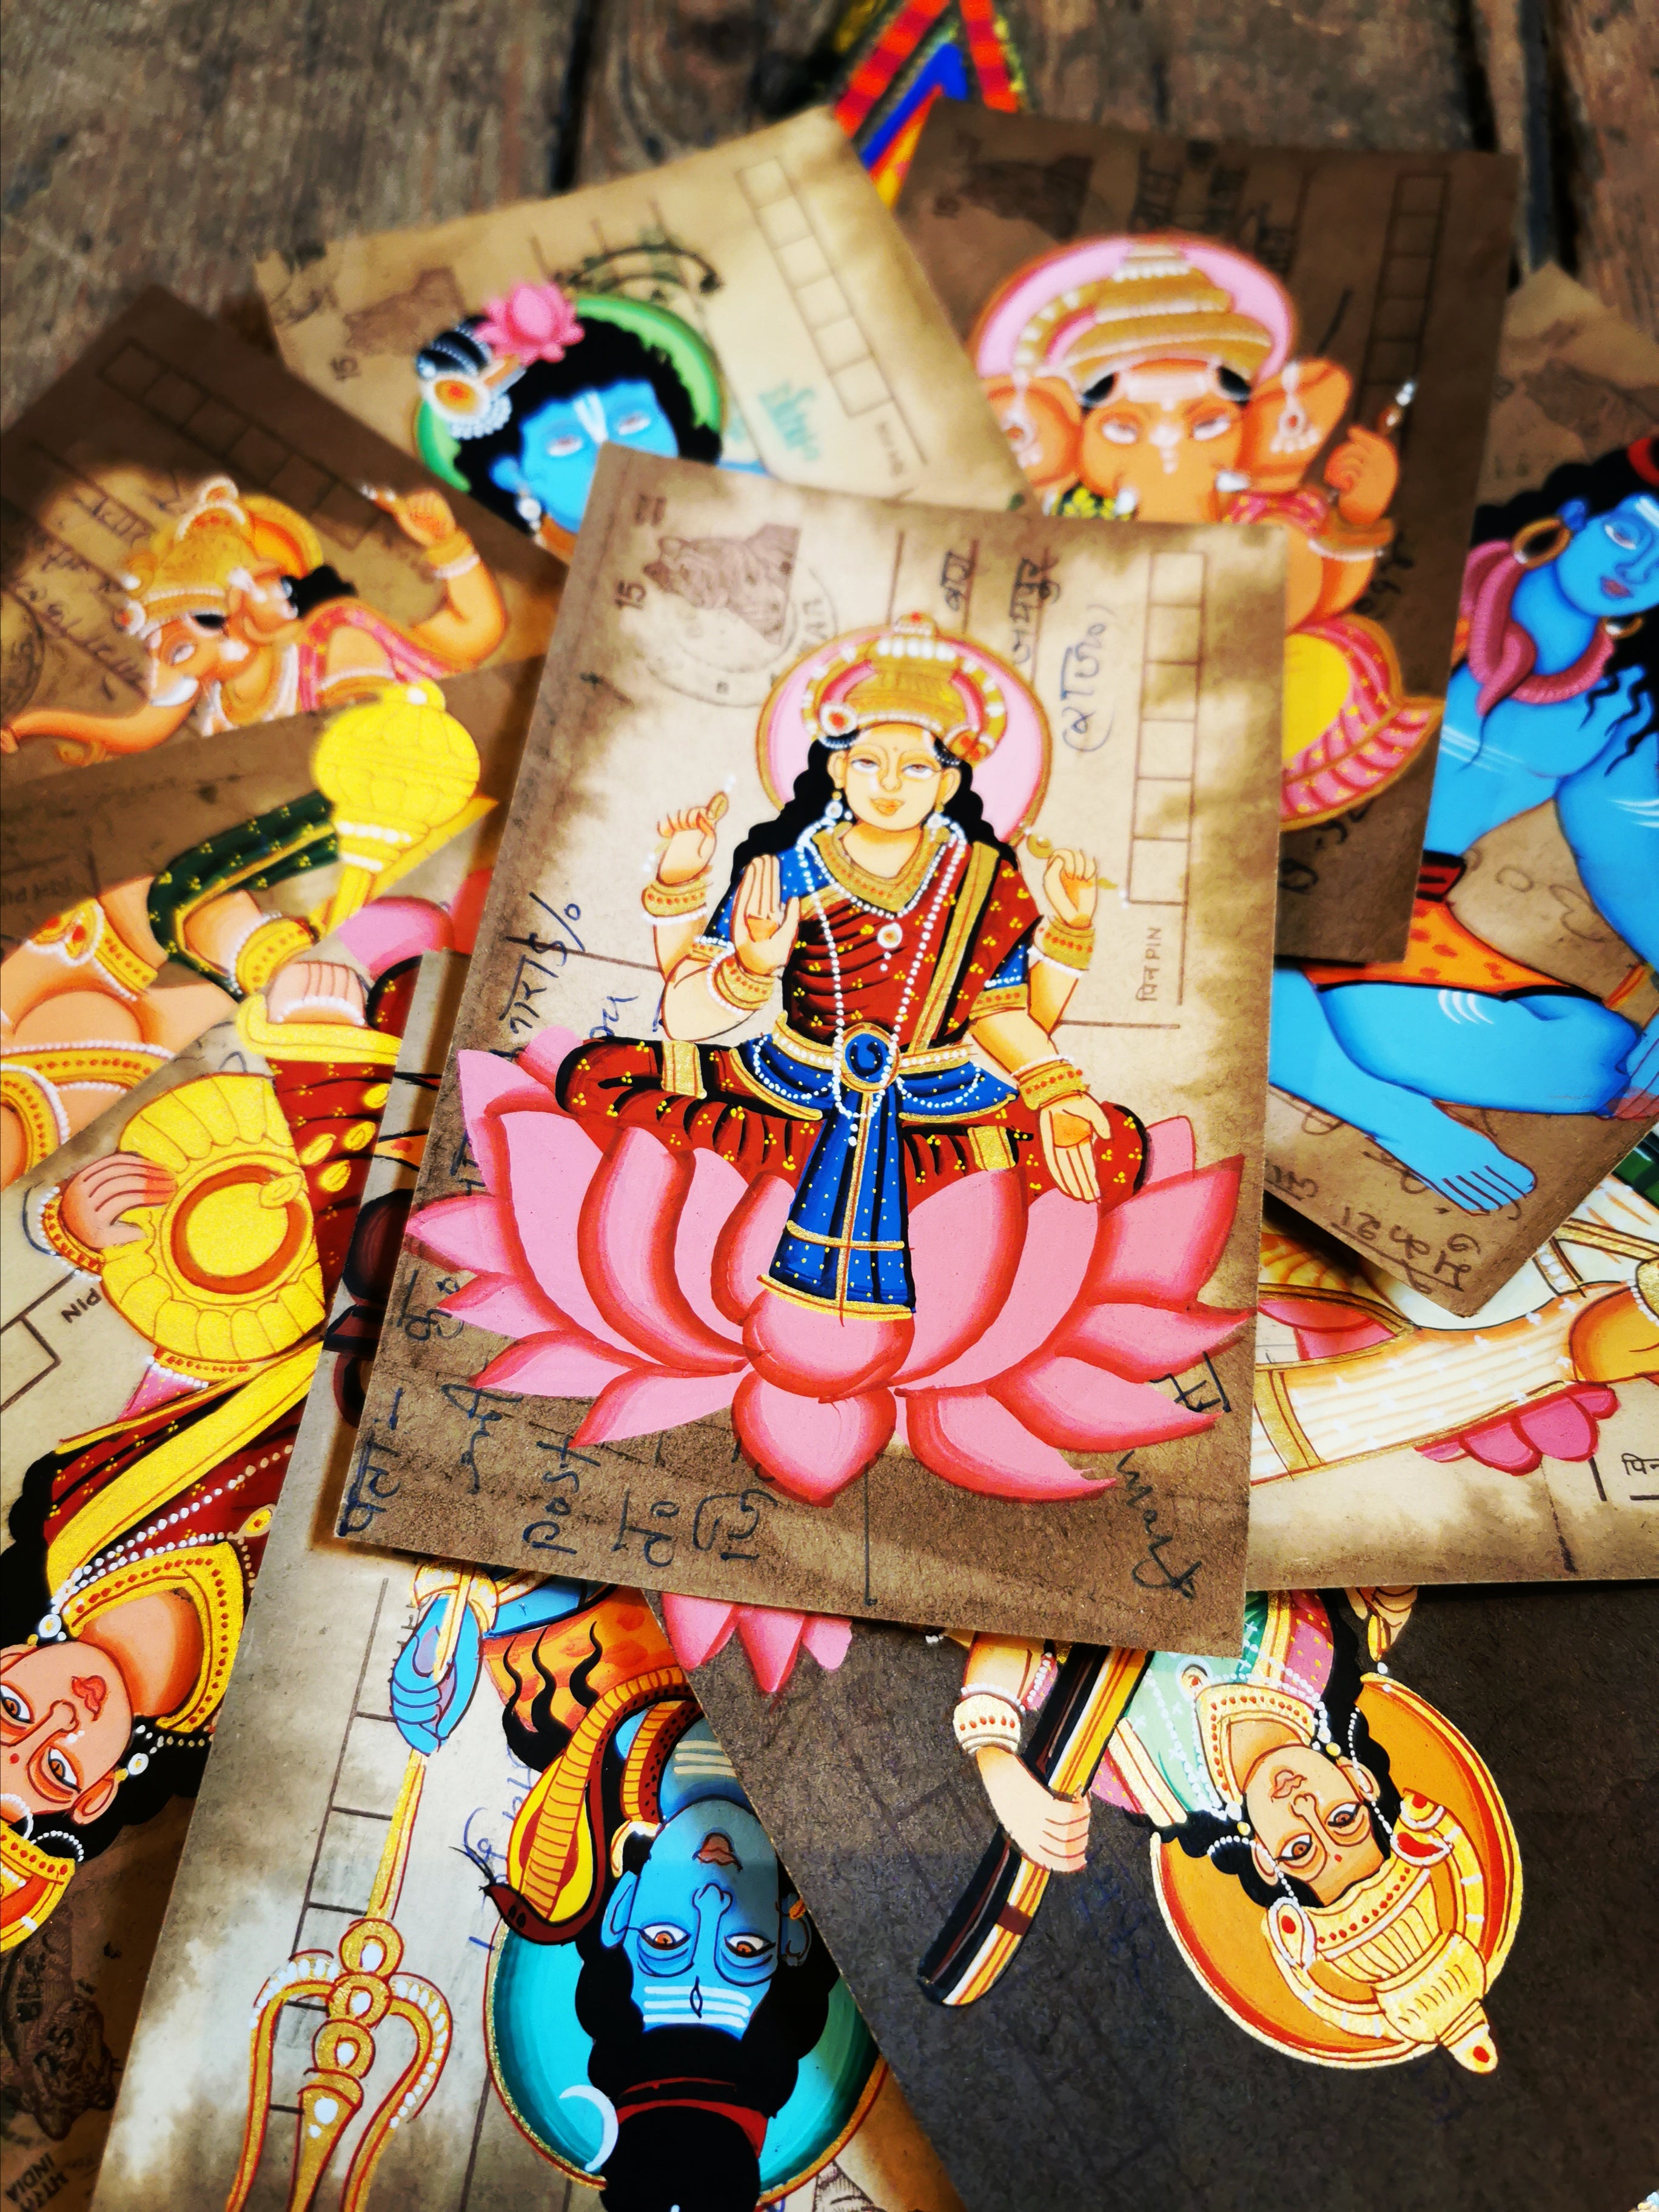 This form of painting in India is typically undertaken by the apprentices learning to paint miniatures. They often used recycled documents, letters and in this case postcards. All are original pieces.


